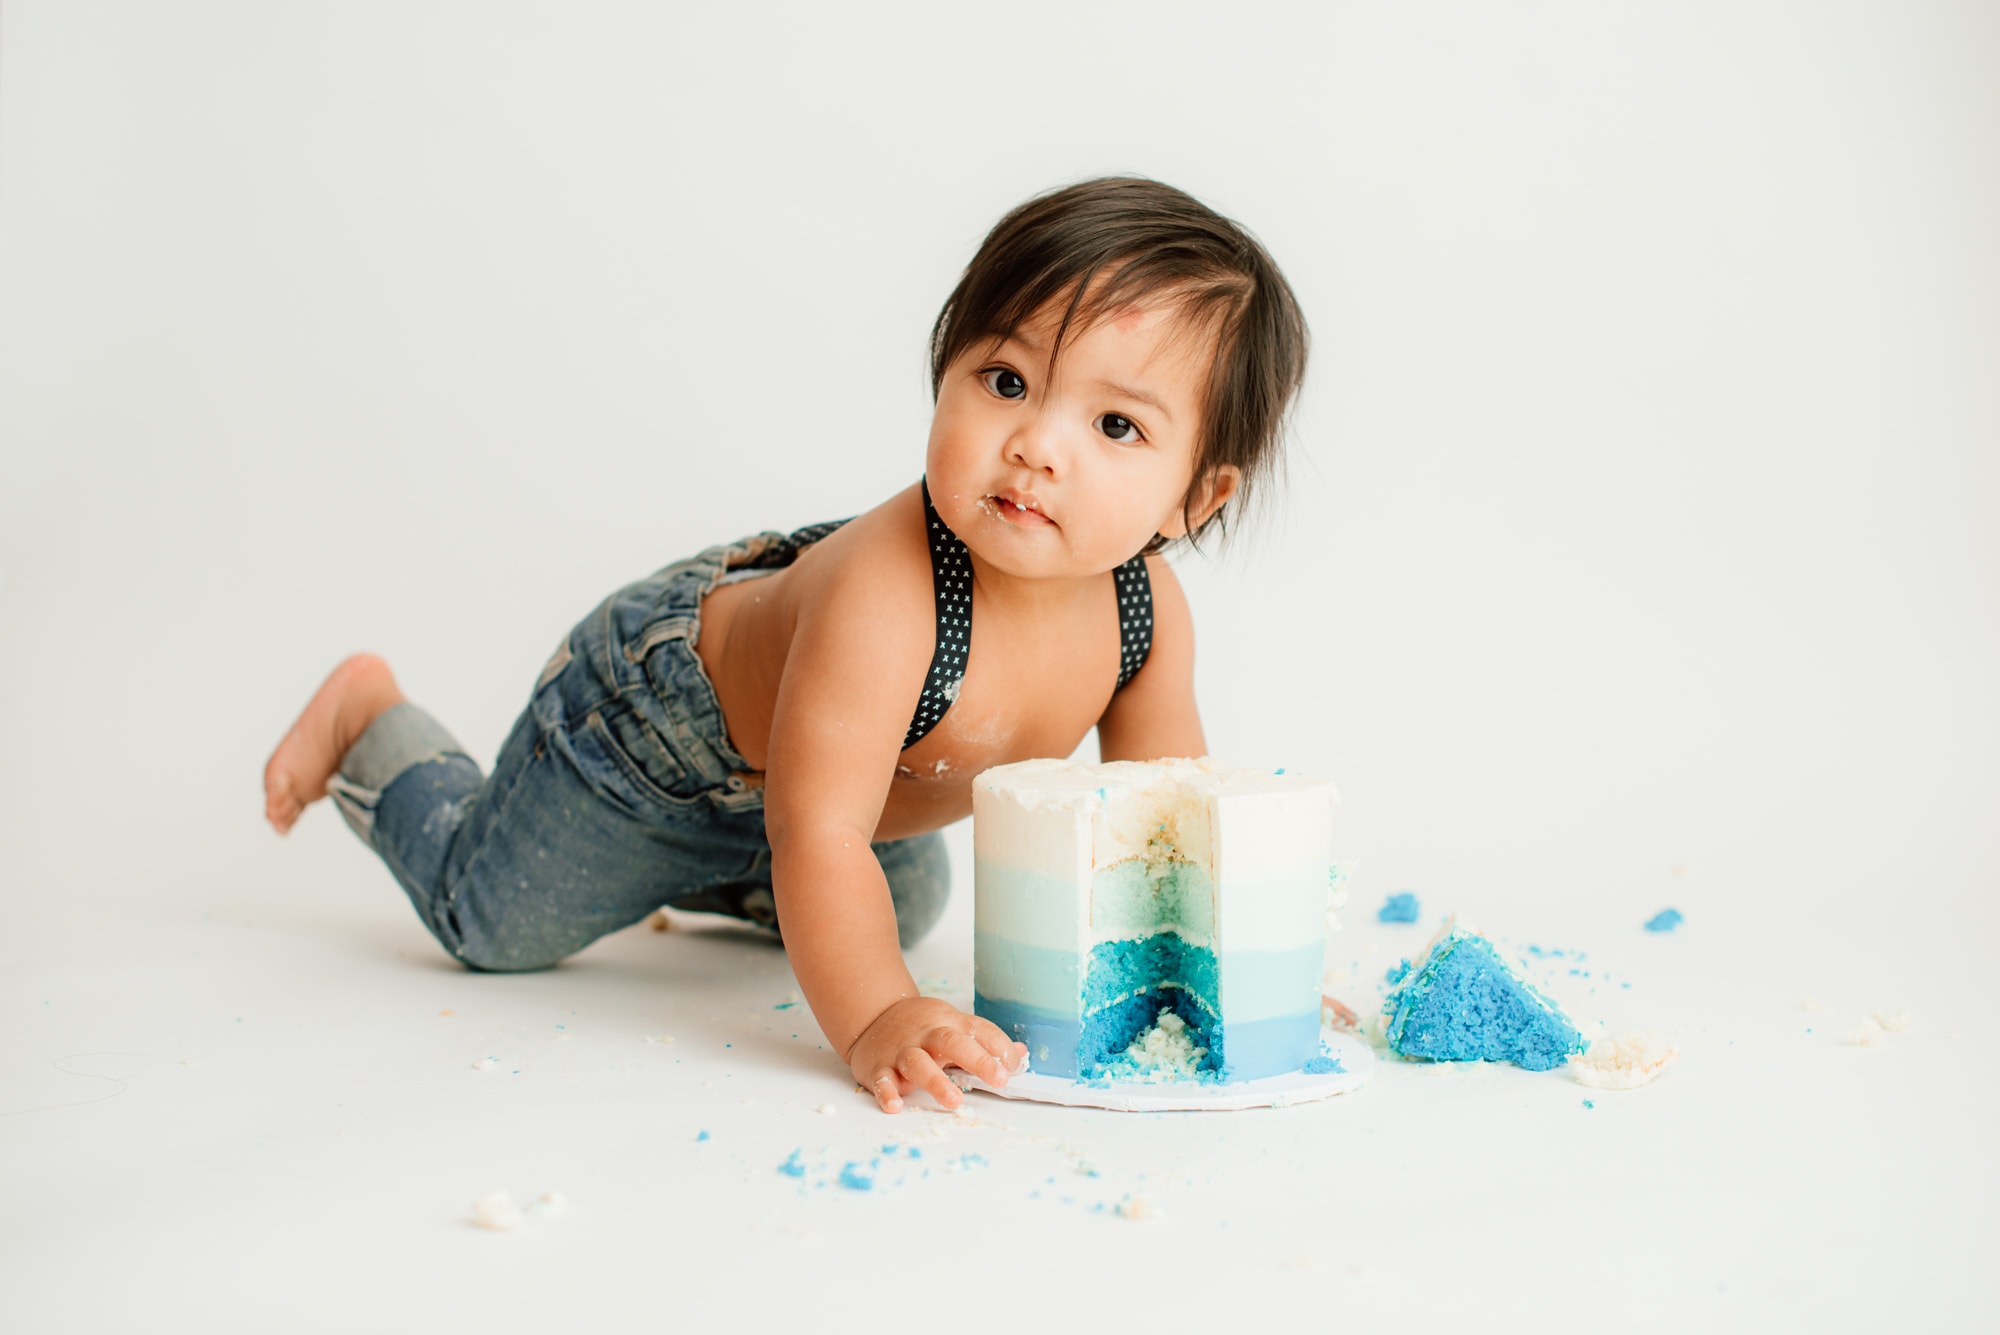 Filipino baby boy crawls towards blue ombre cake in simple cake smash session.